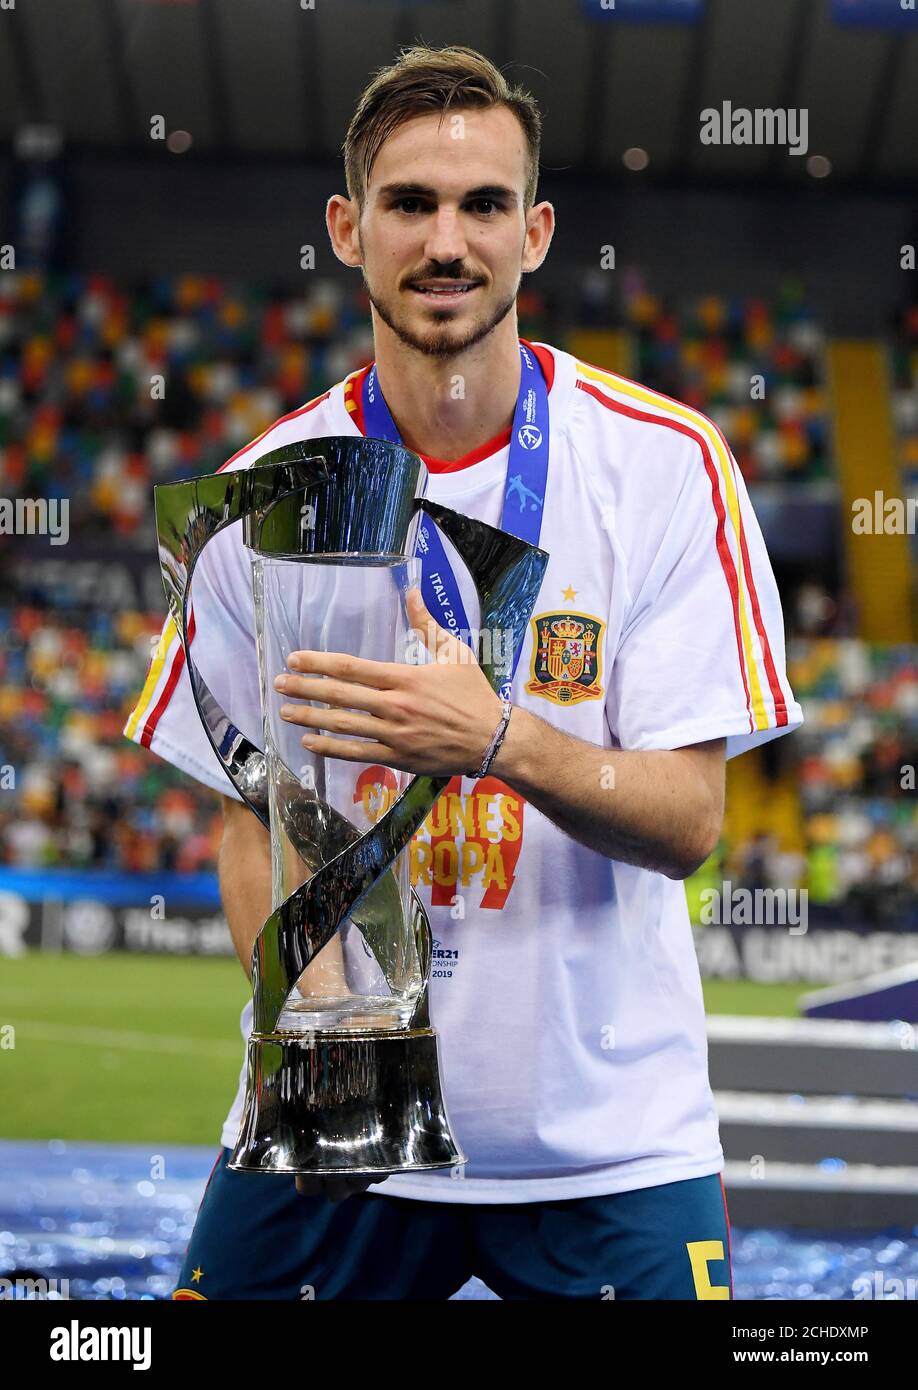 Uefa U21 Trophy High Resolution Stock Photography and Images - Alamy